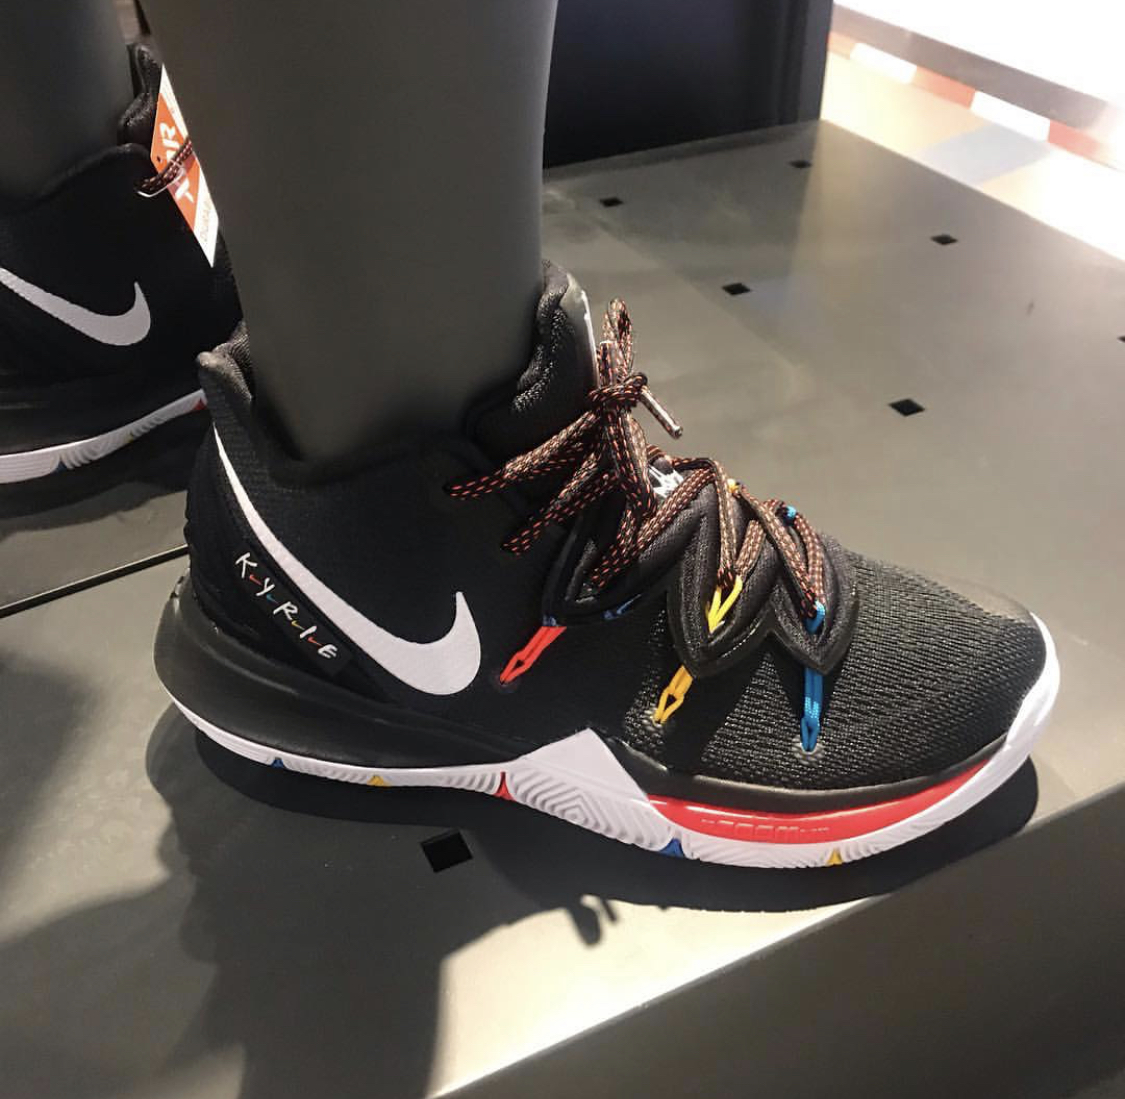 kyrie 5 finish line